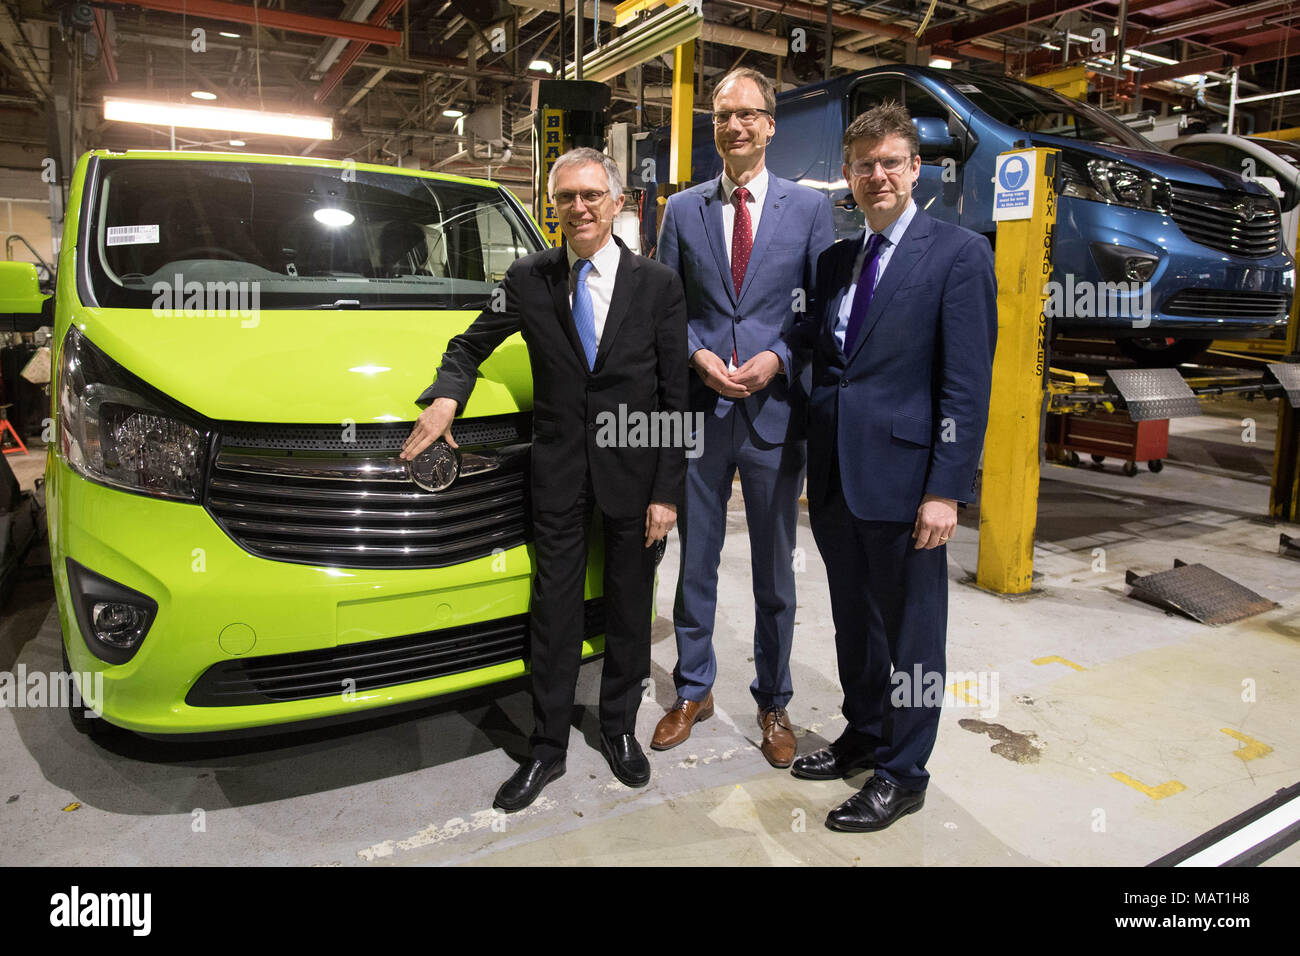 (left to right) Chairman of Groupe PSA Carlos Tavares, CEO of Opel/Vauxhall Michael Lohscheller and Business Secretary Greg Clarke at the Vauxhall plant in Luton to announce its plans to build a new van. Stock Photo